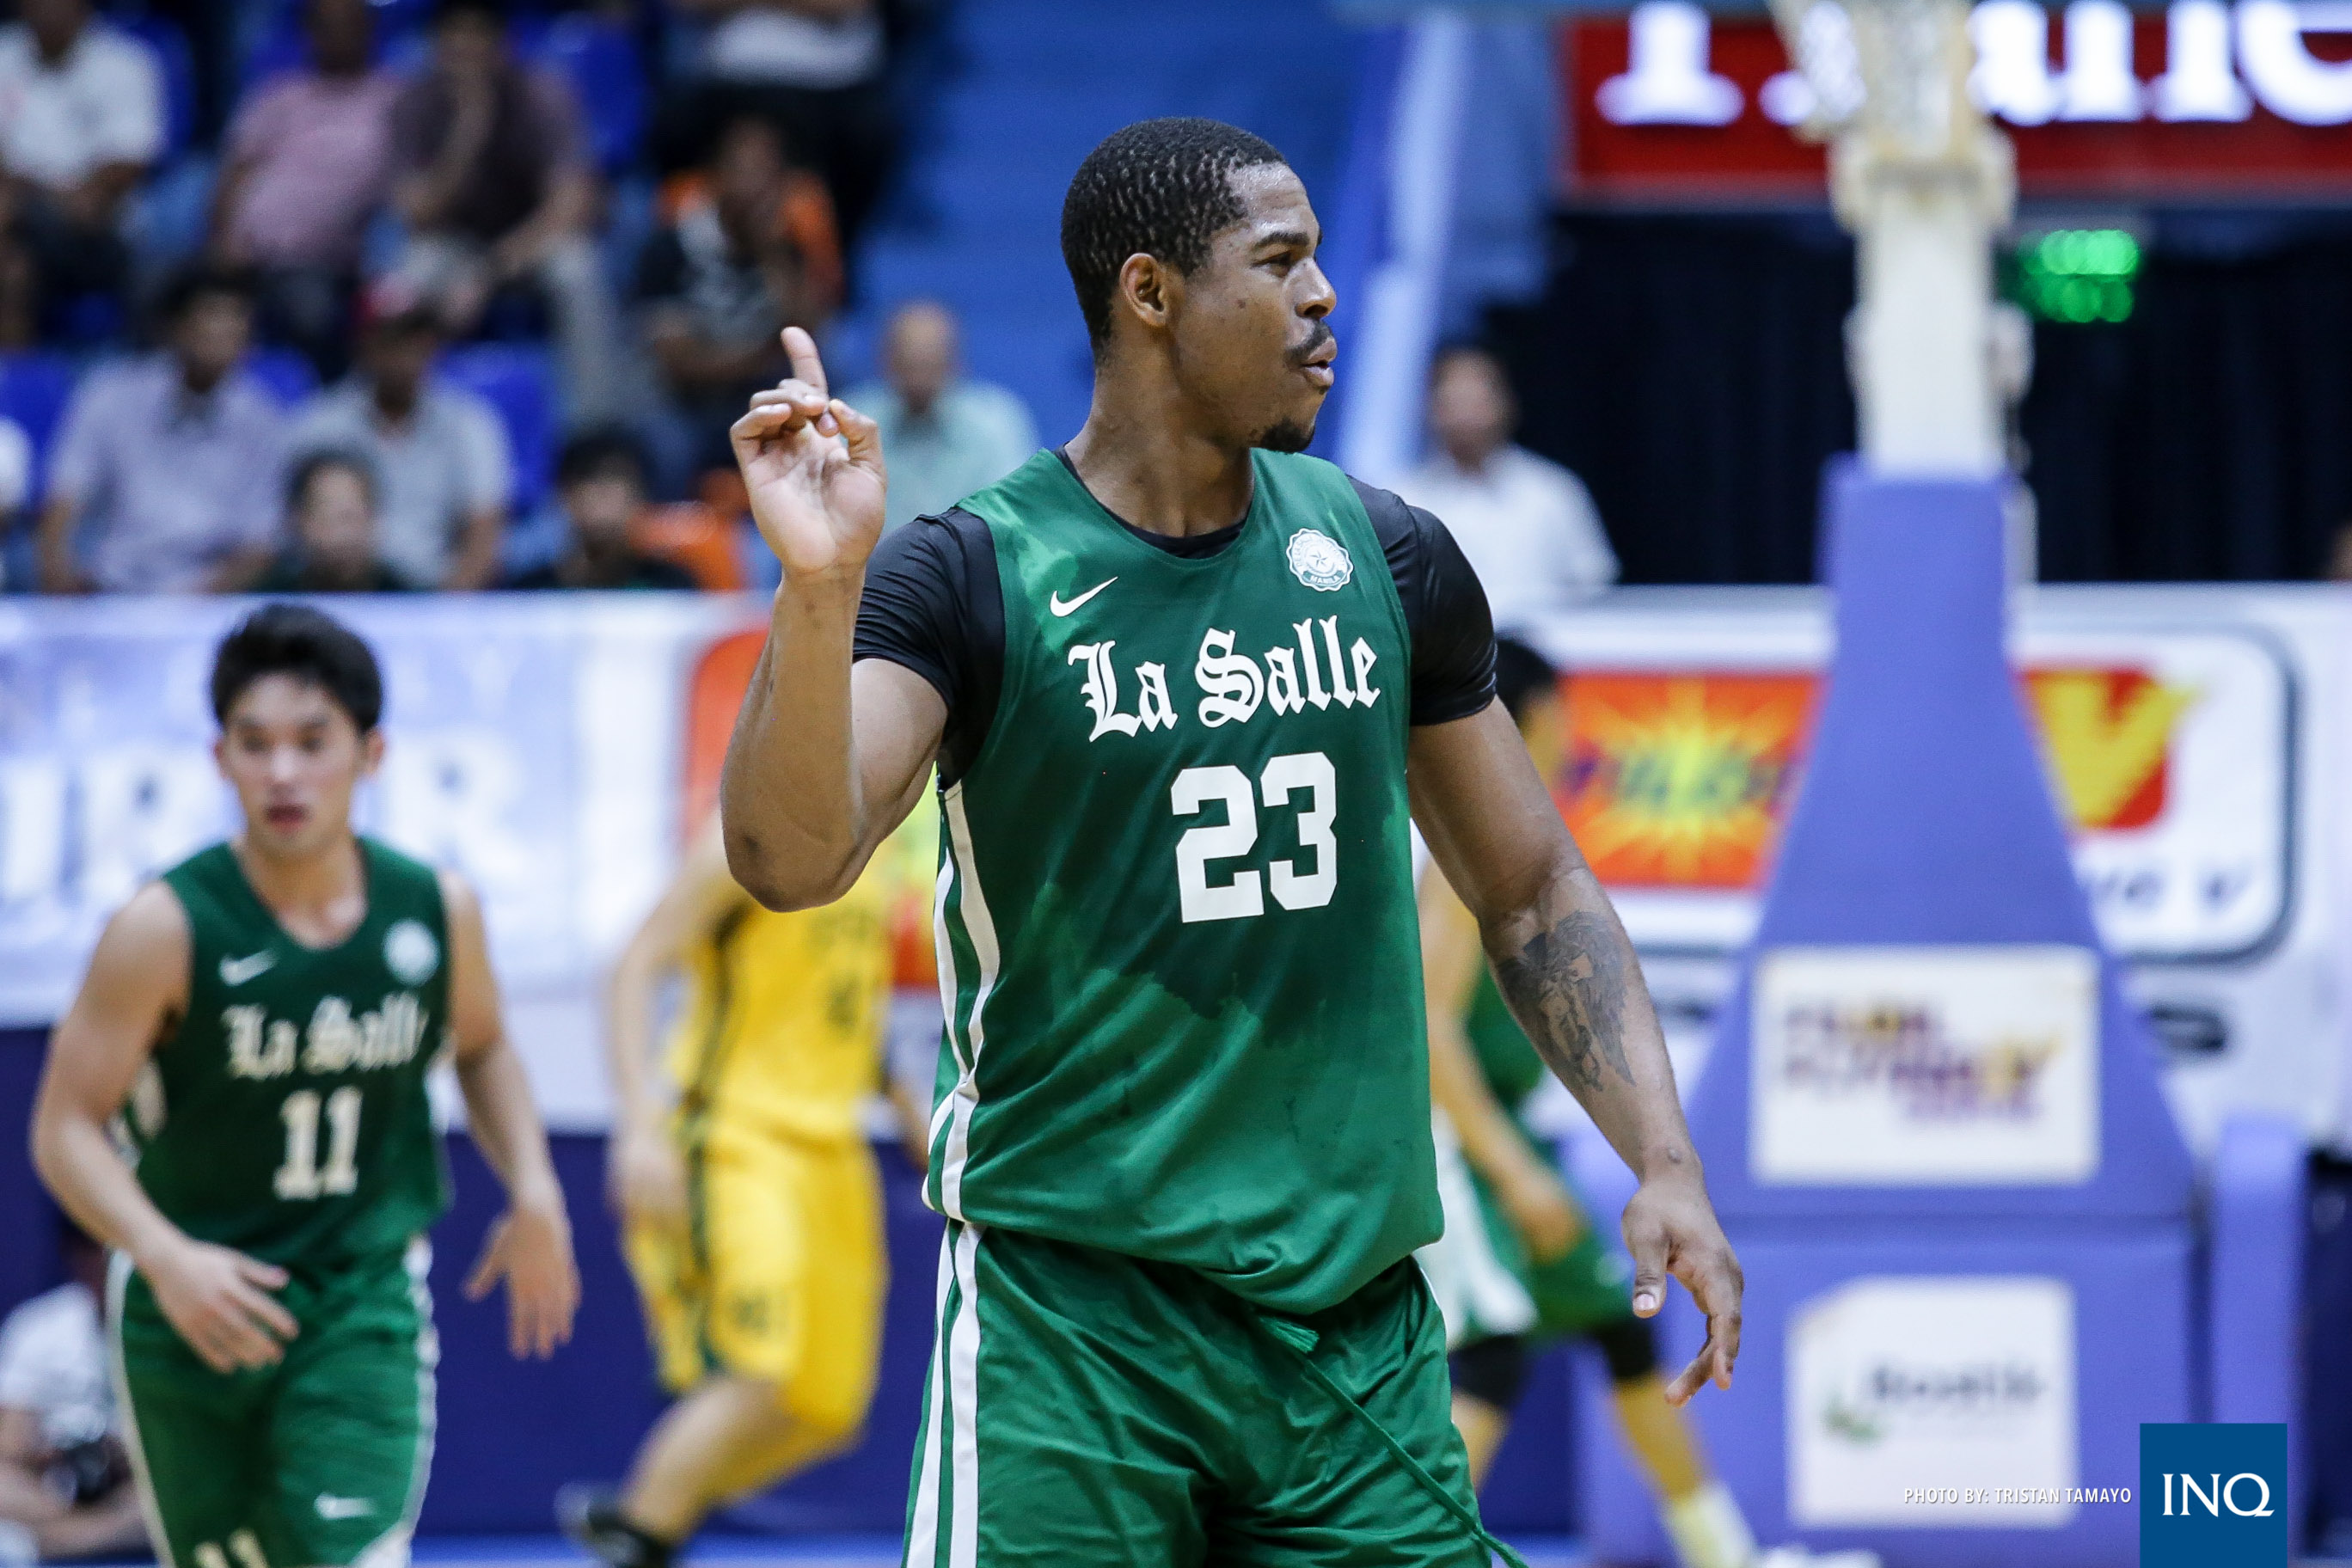 Mbala erupts for 32 as La Salle barges into semis with FEU rout ...